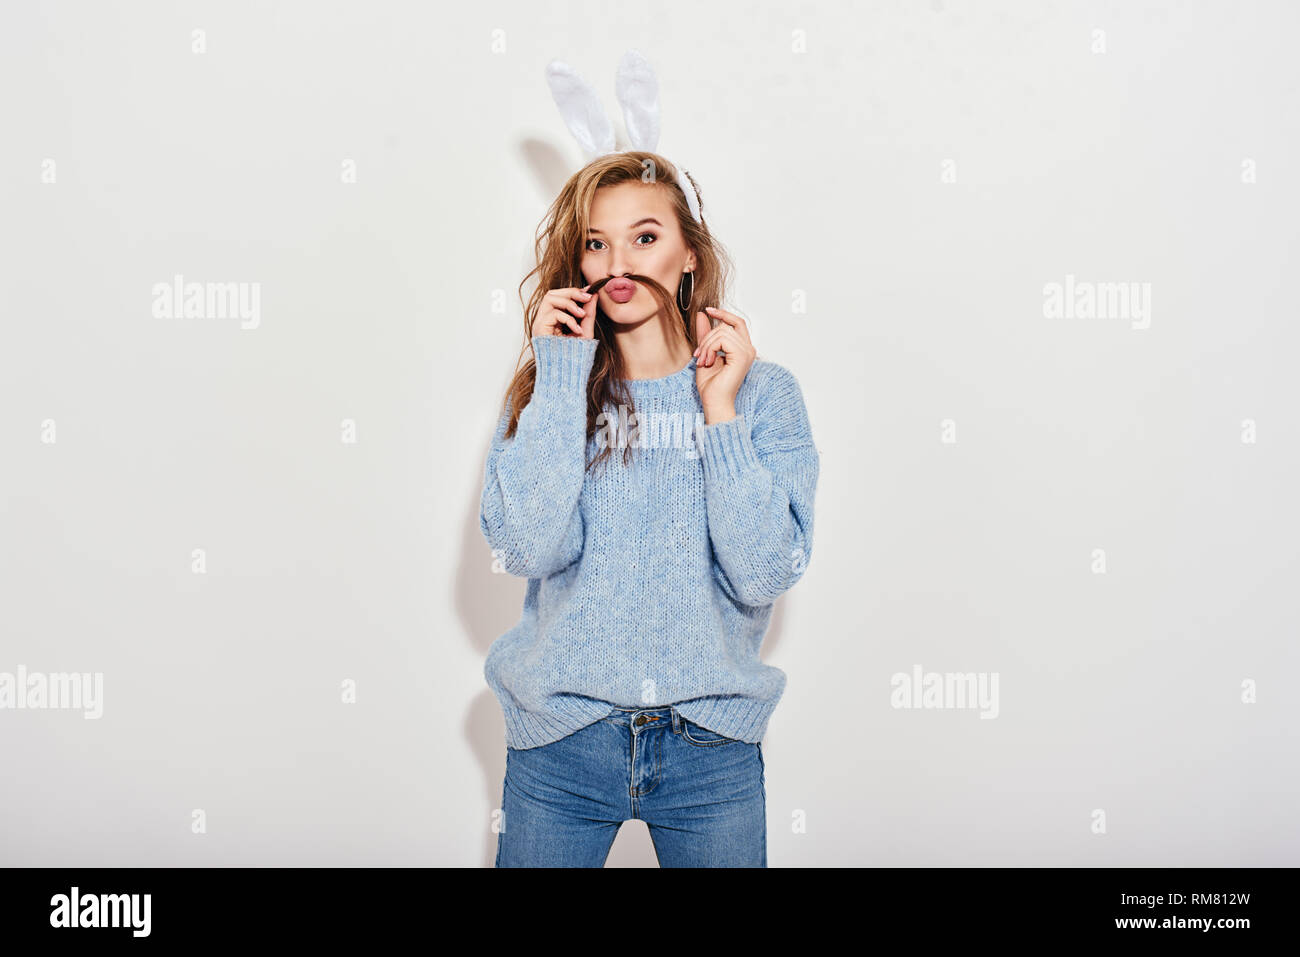 Portrait of cute playful girl wearing blue sweater, jeans and bunny ears  holding a strand of her hair above the lip, looking at camera with widened  eyes, amazedly, isolated over white background